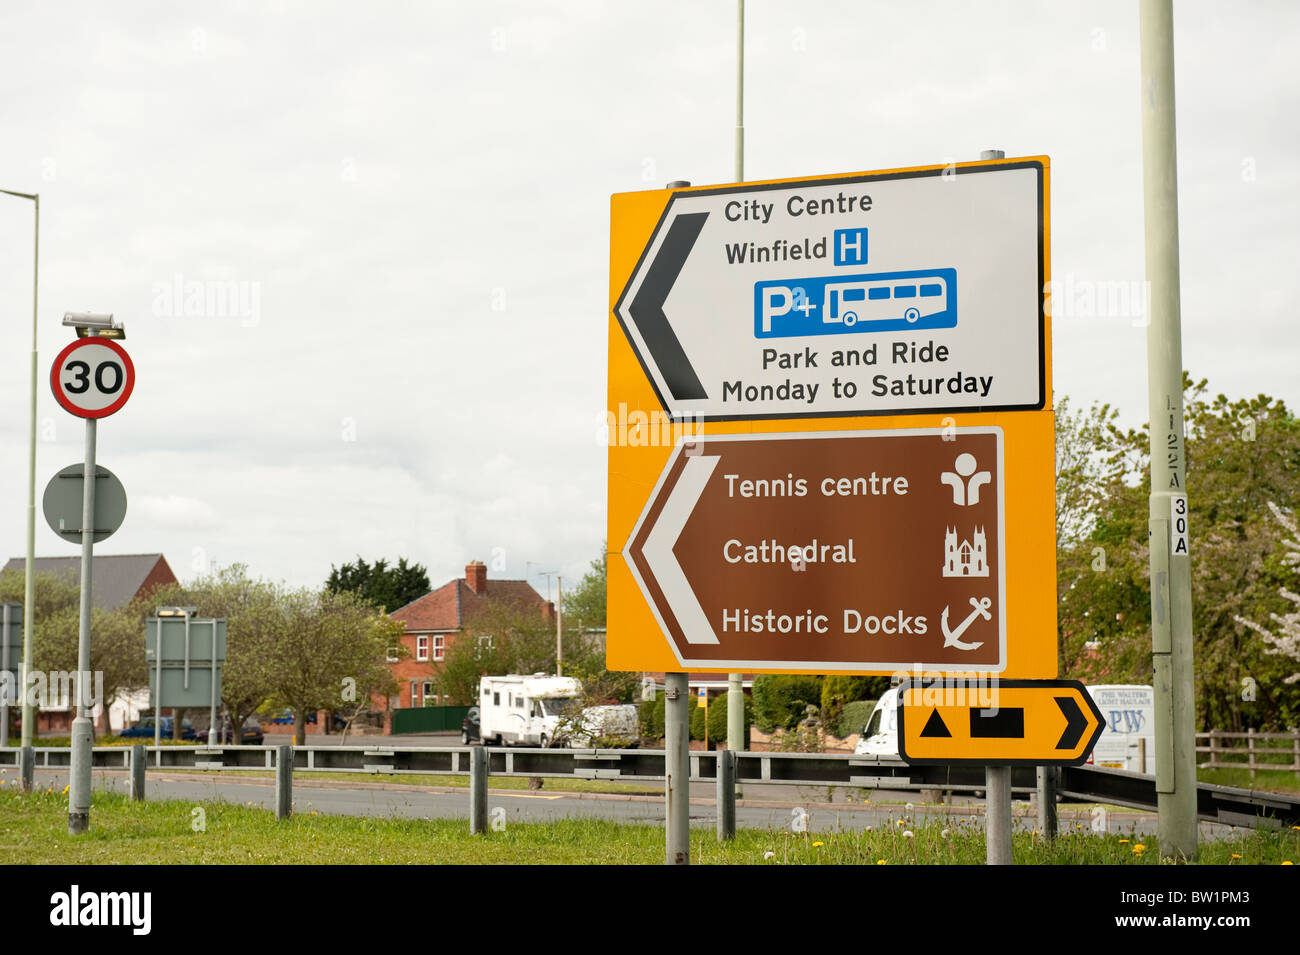 Gloucester Centre Winfield Cathedral Docks Hospital Roadsign Stock ...